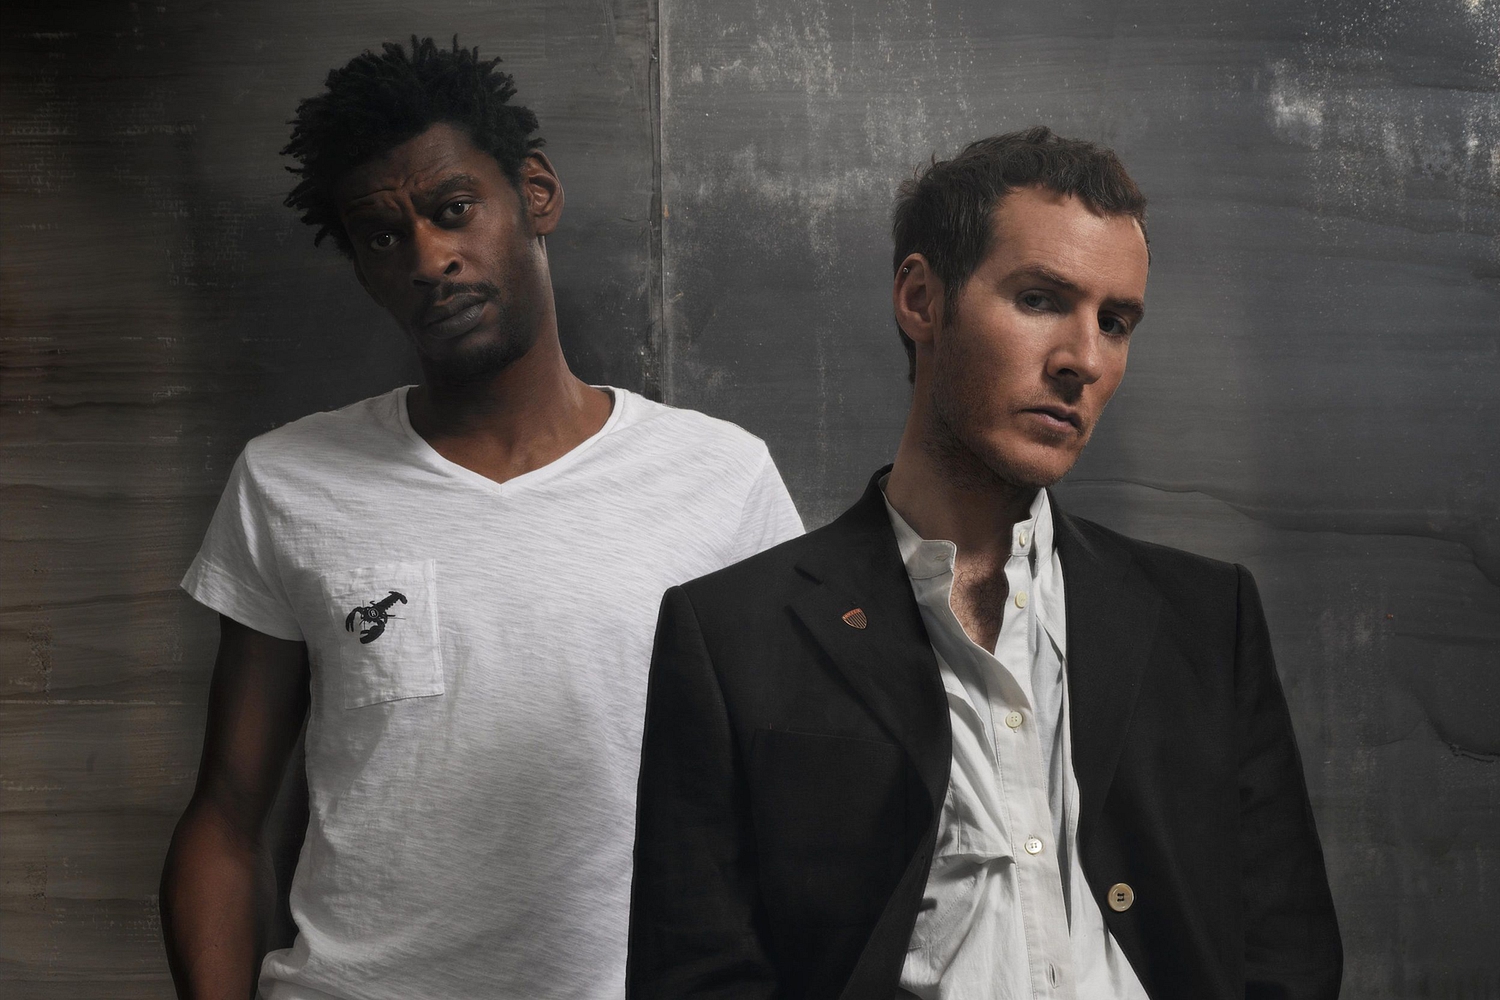 Massive Attack promise a "different approach" for new studio album